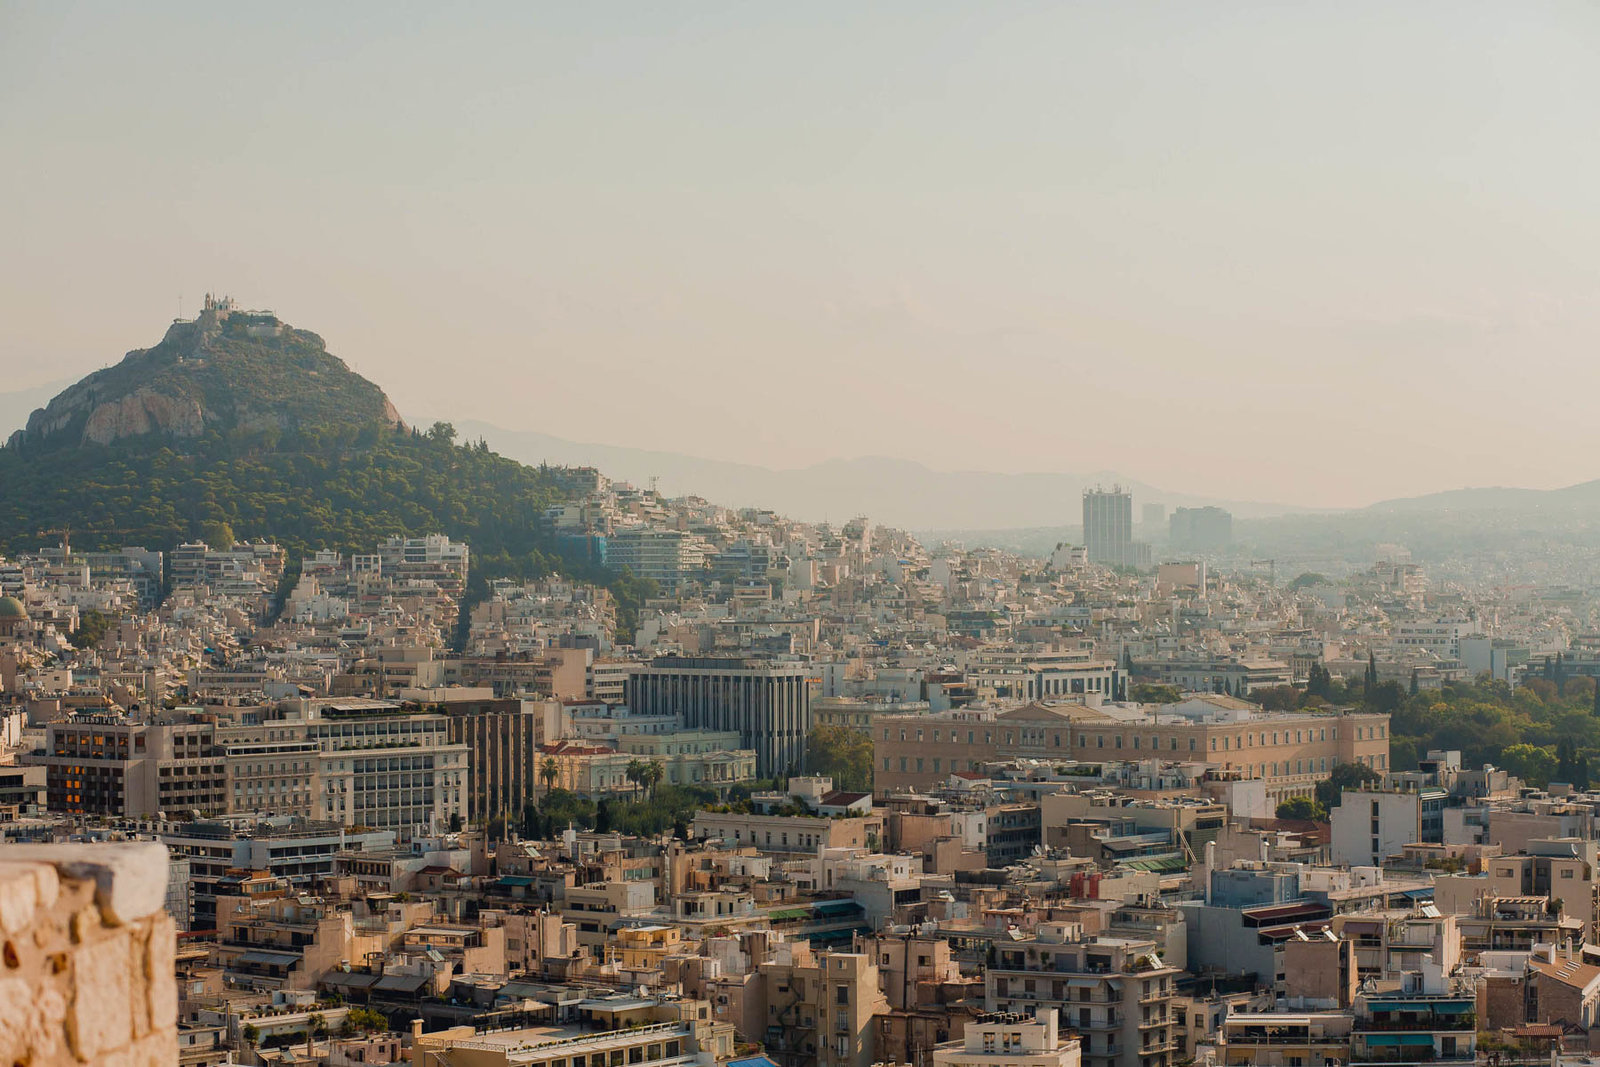 View of Mount Lycabettus from the Acropolis in Athens, Greece